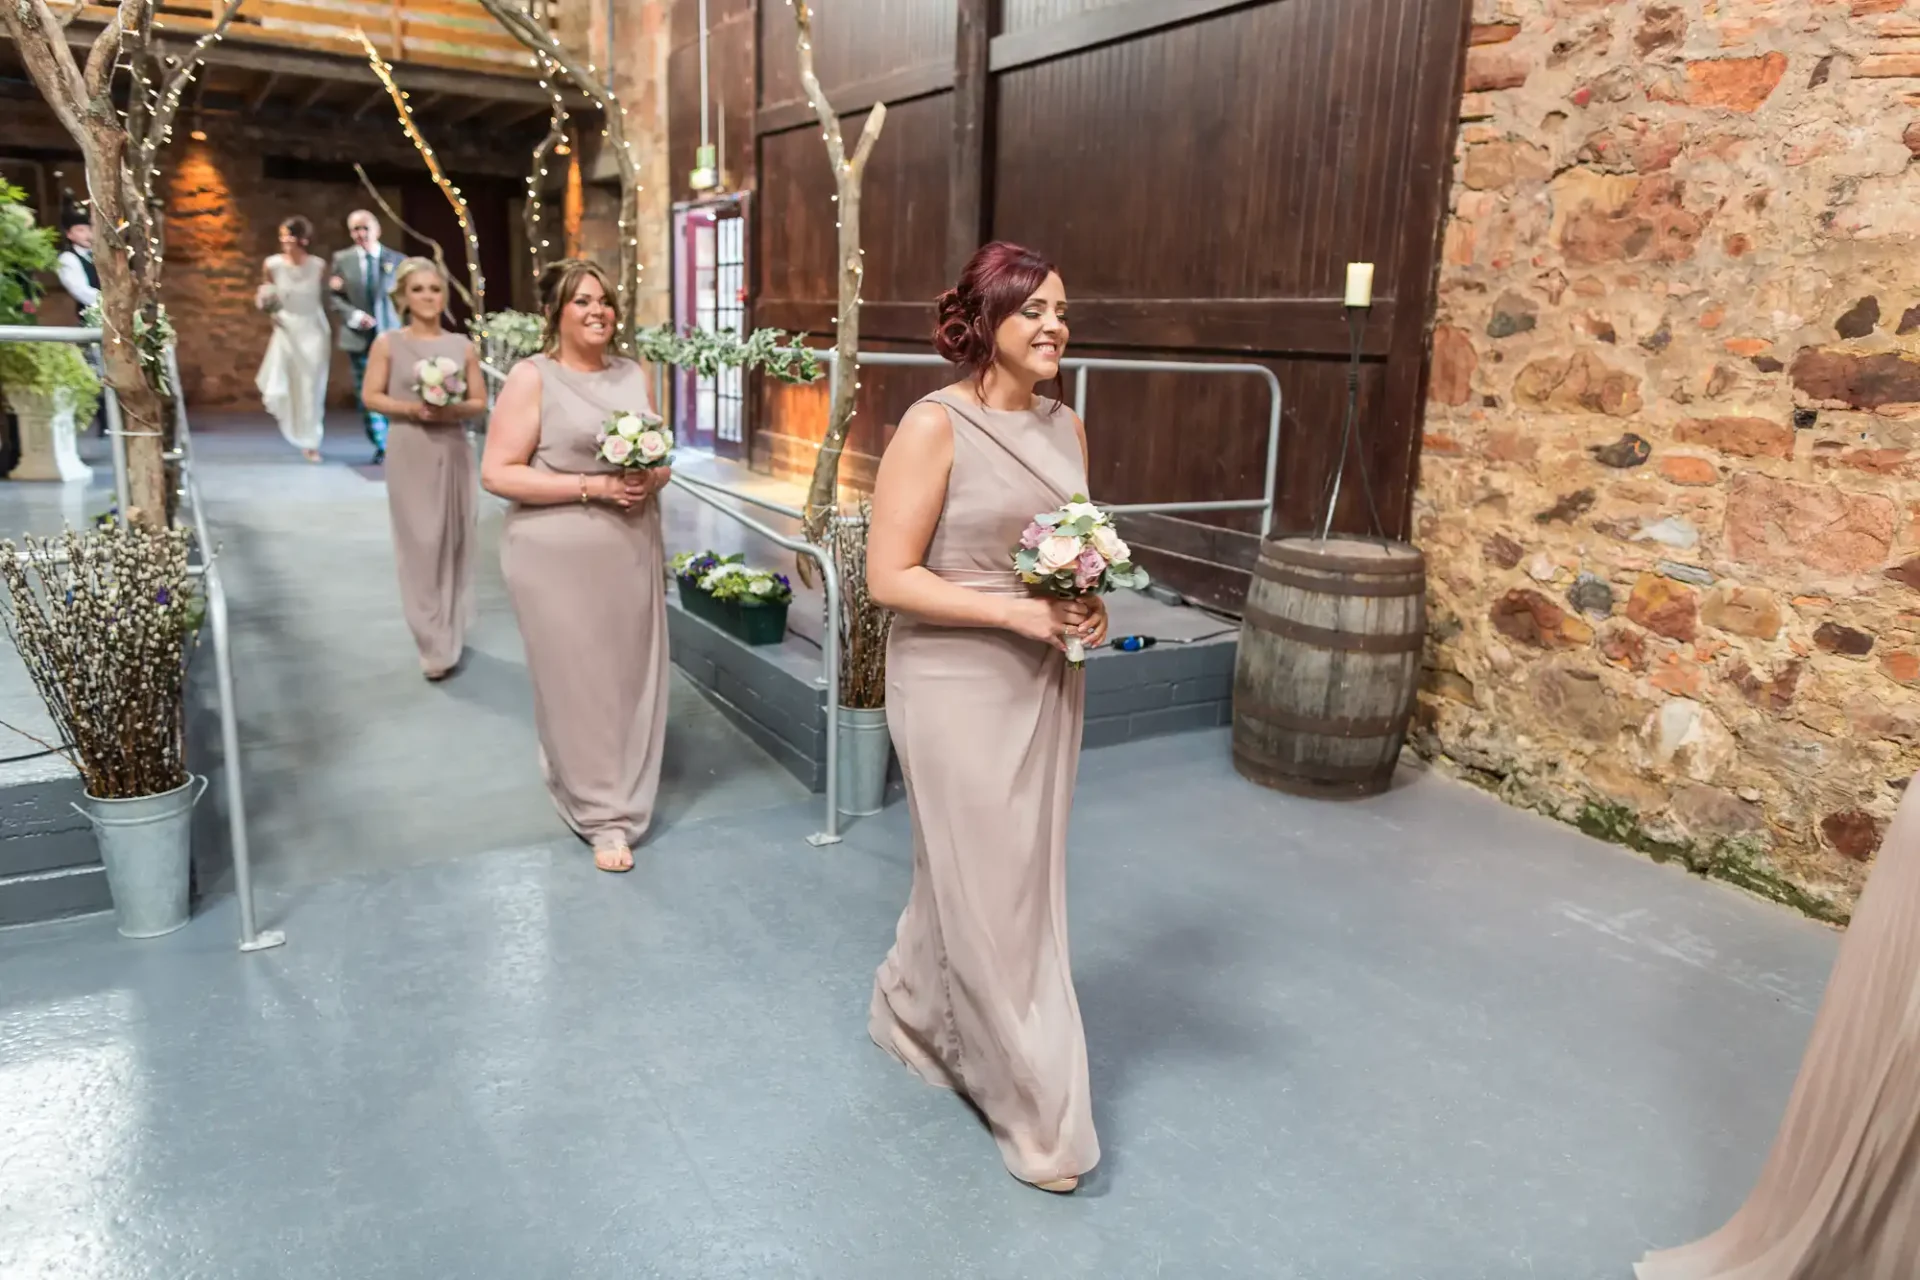 Three bridesmaids walk down an aisle in a rustic venue, holding bouquets, dressed in long beige dresses.